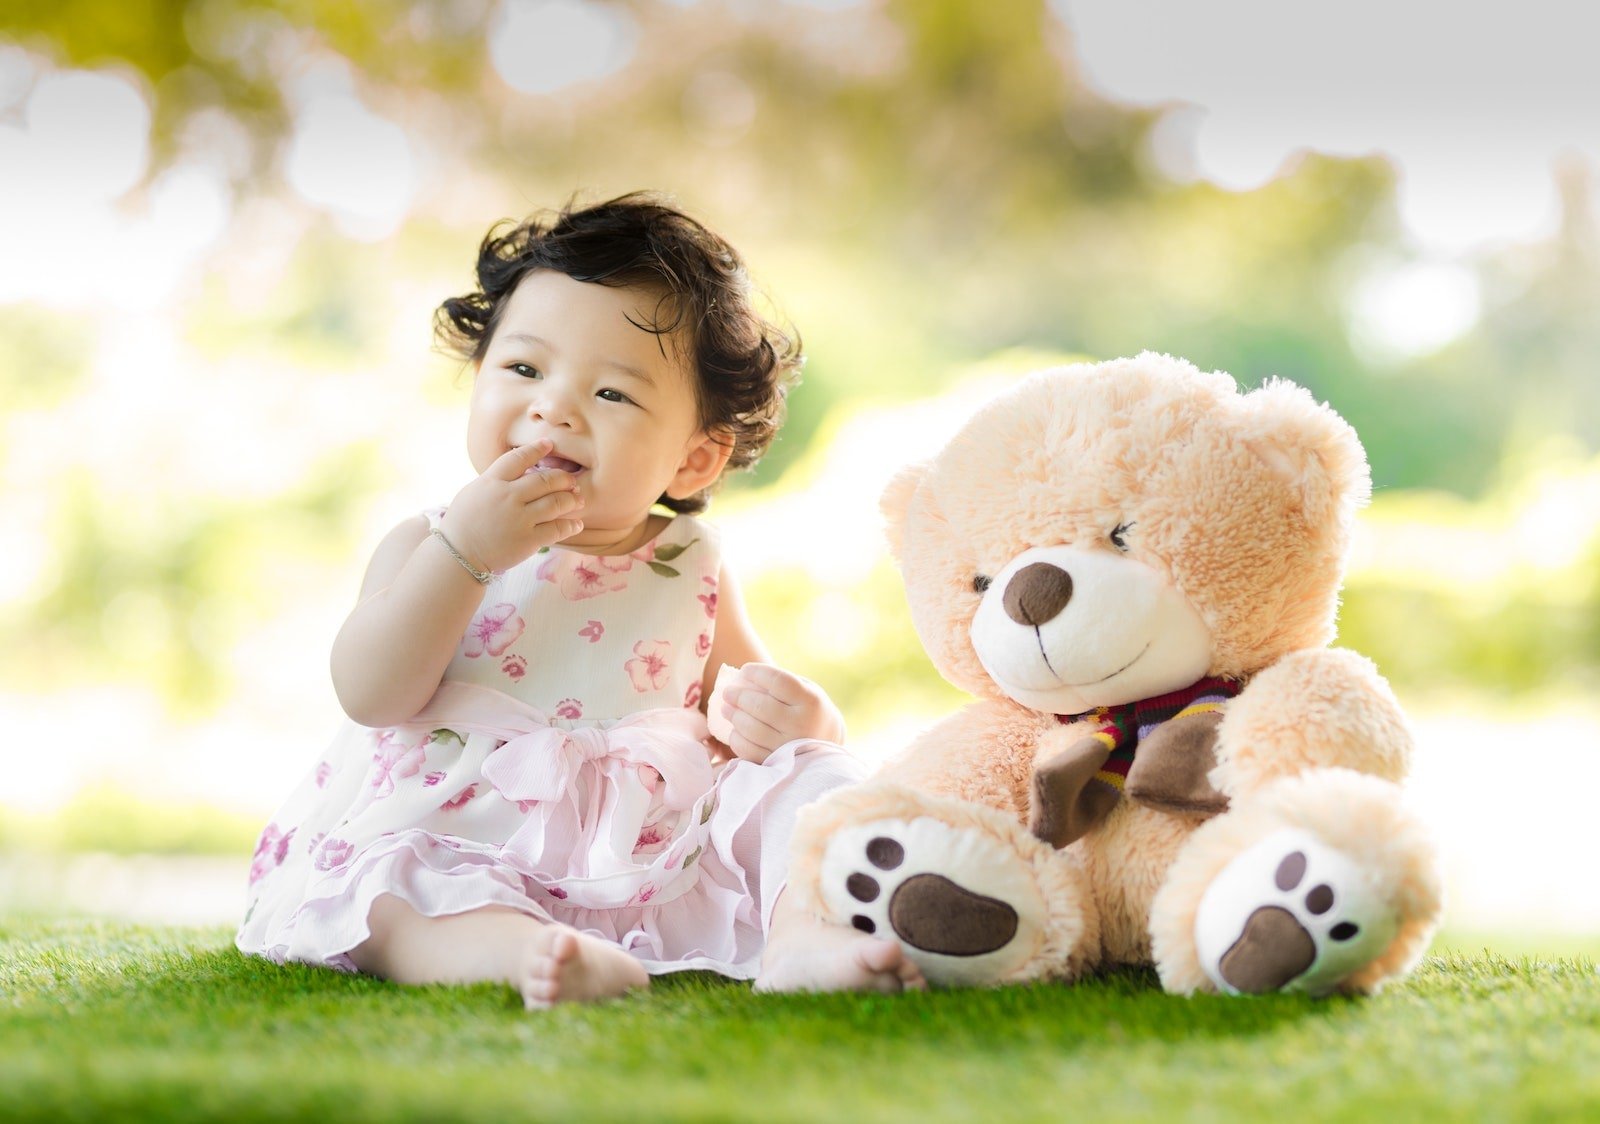 Smiling baby with teddy bear